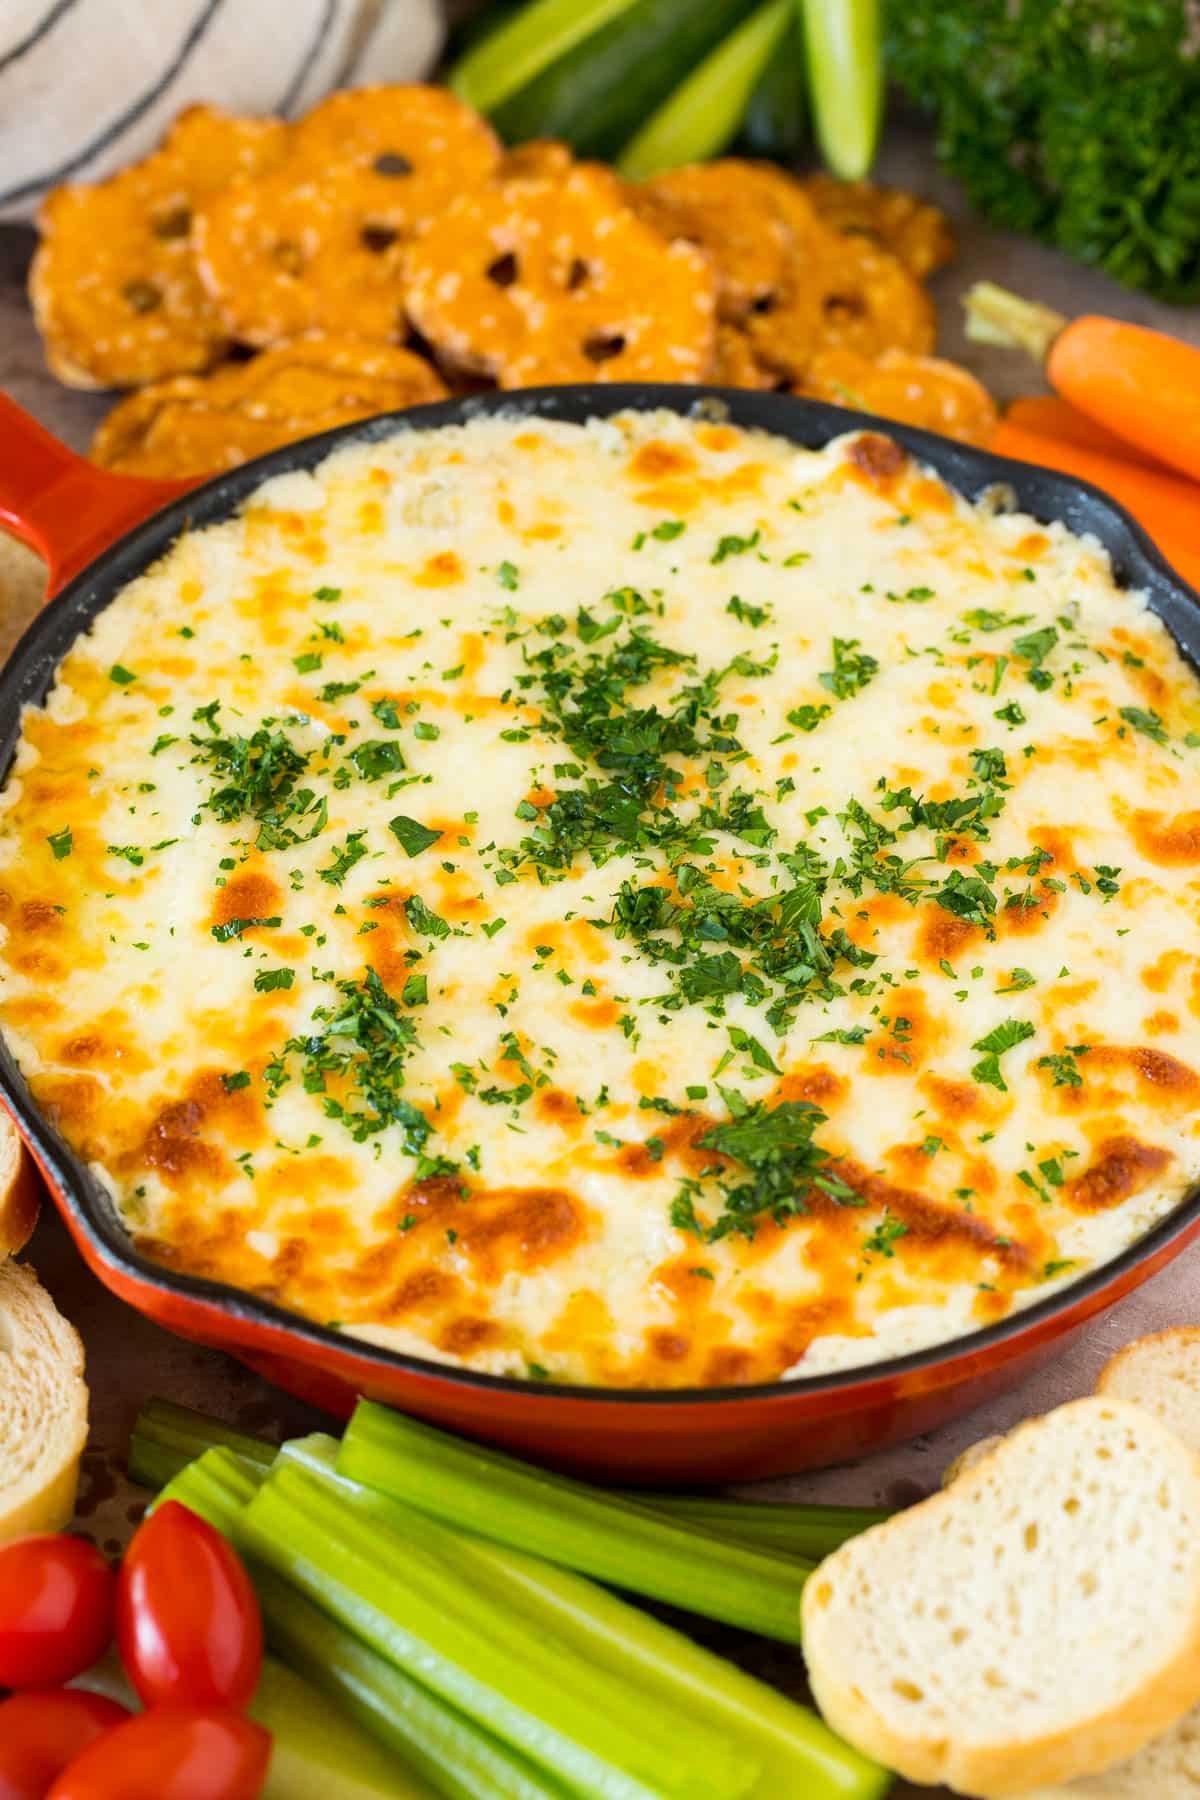 A pan of creamy dip with cheese melted on top.